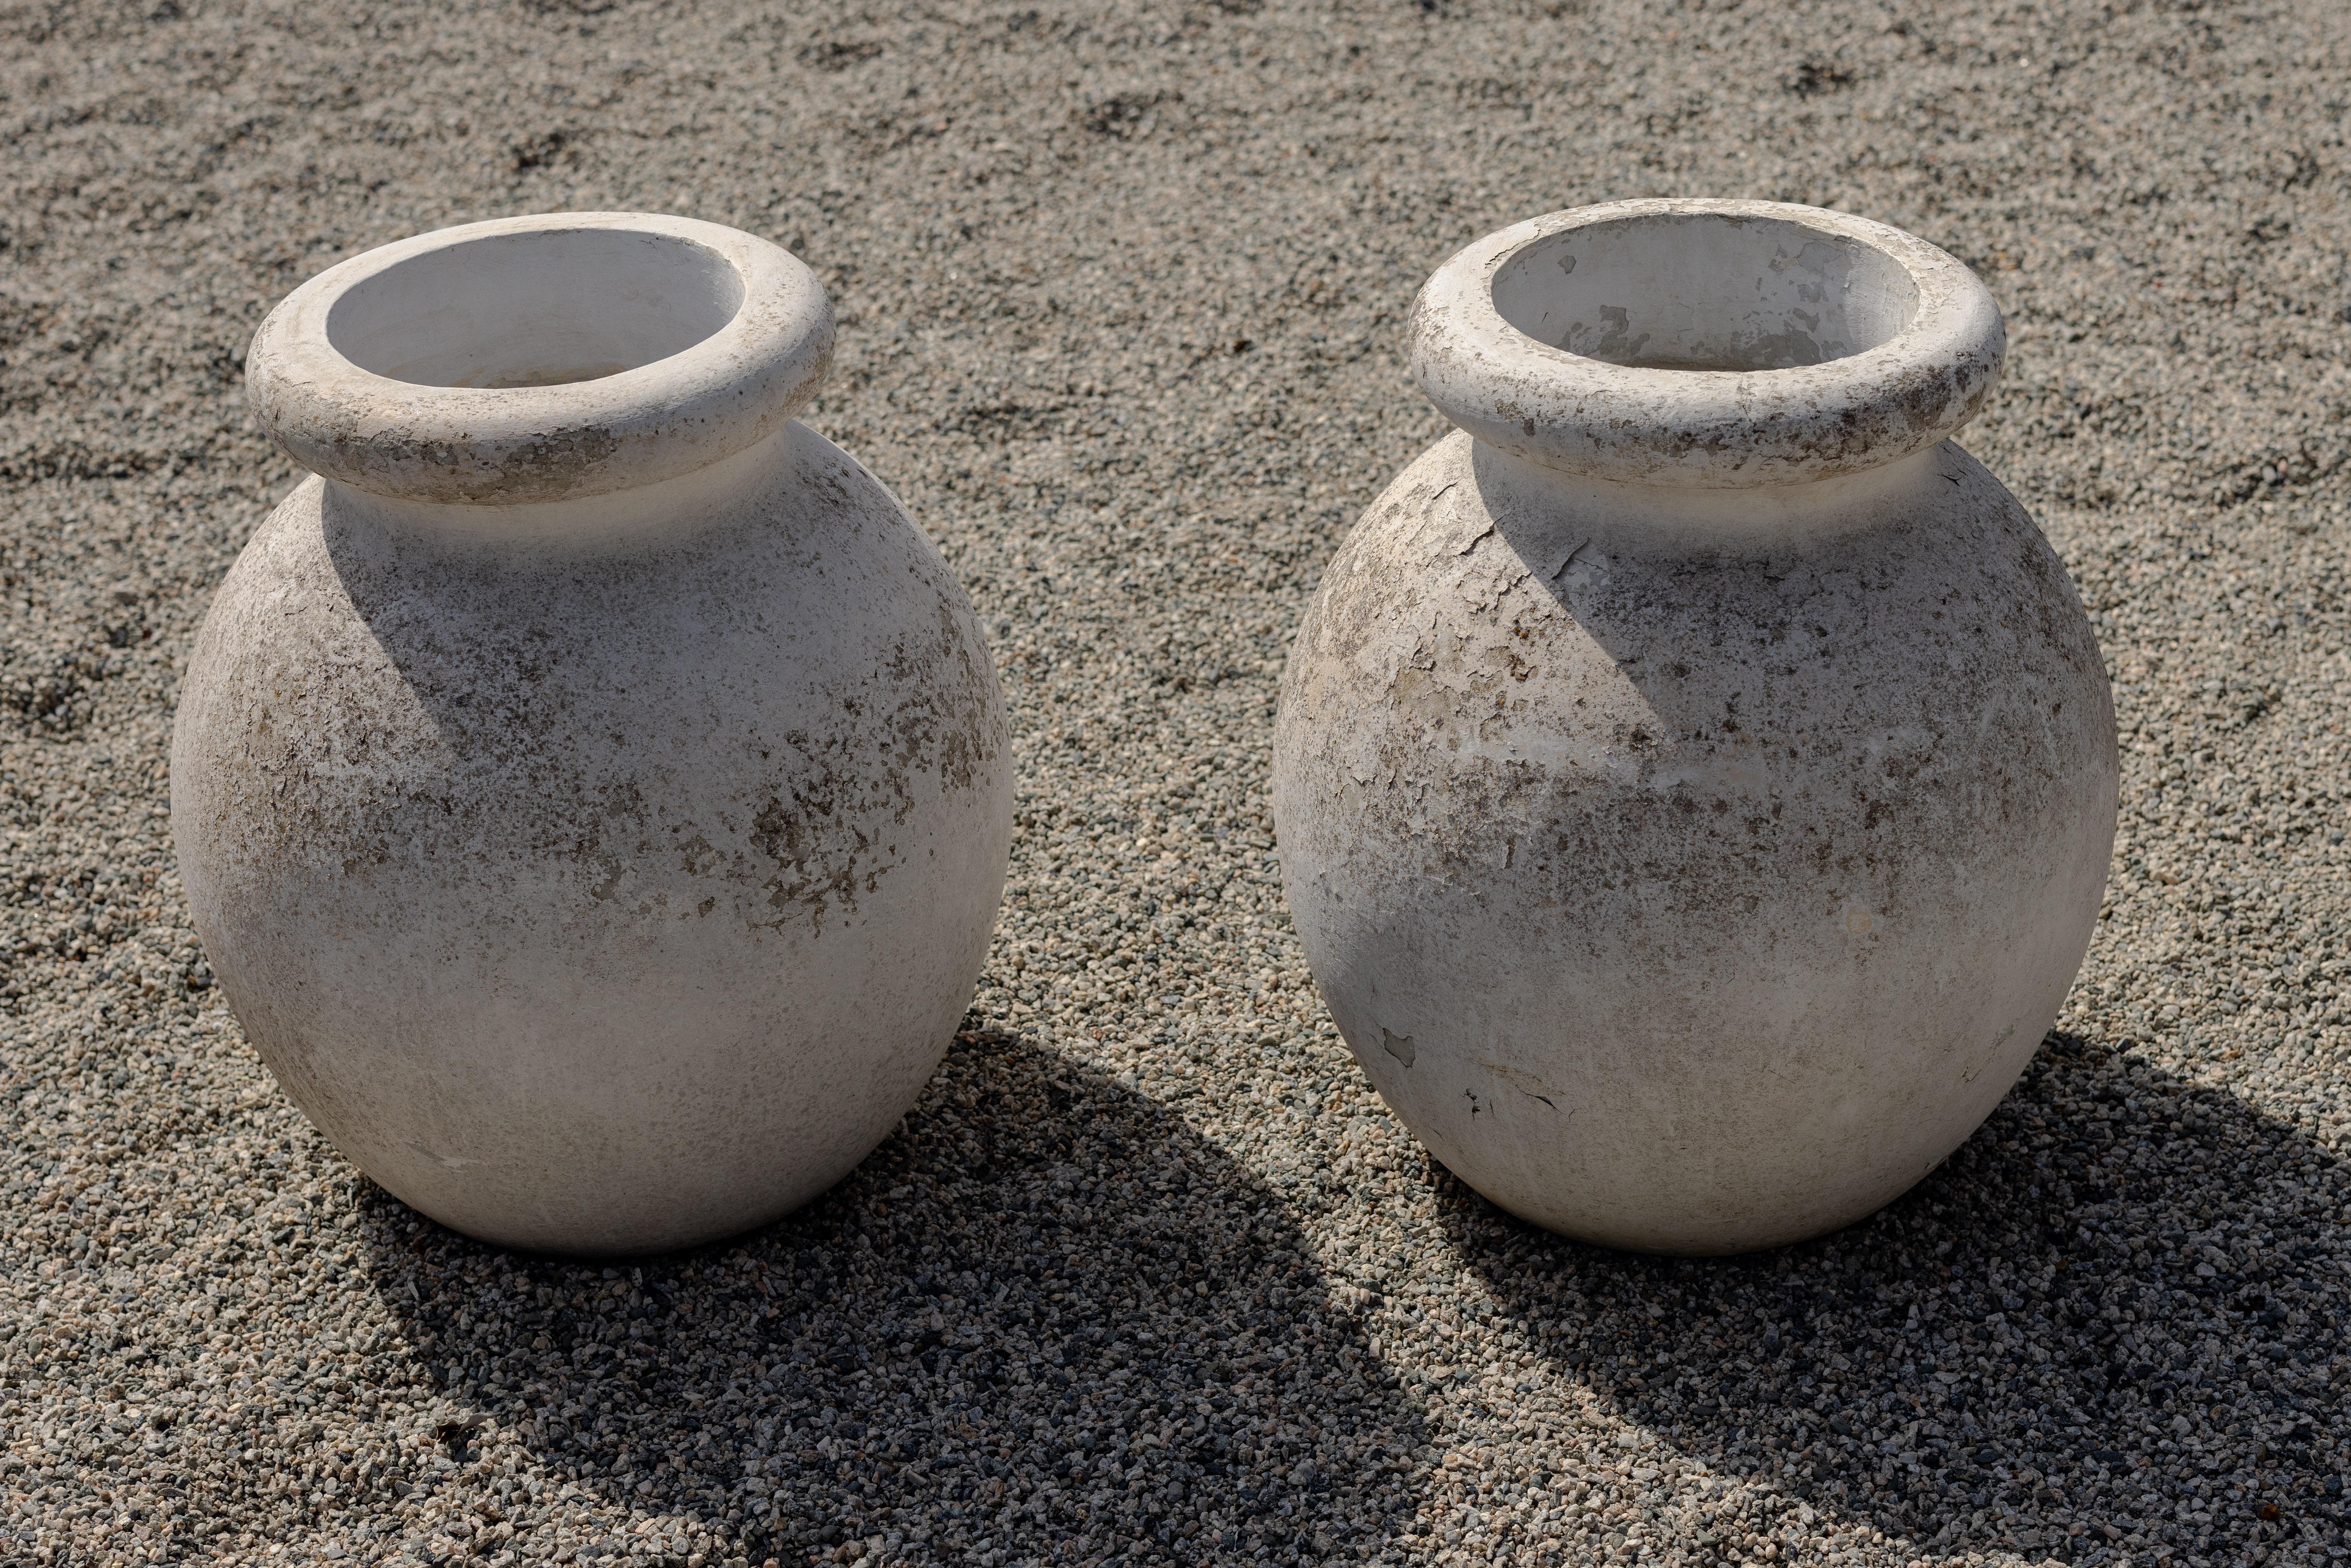 A Pair of Large Olive Jars by Willy Guhl, 1960's, Switzerland

H 28